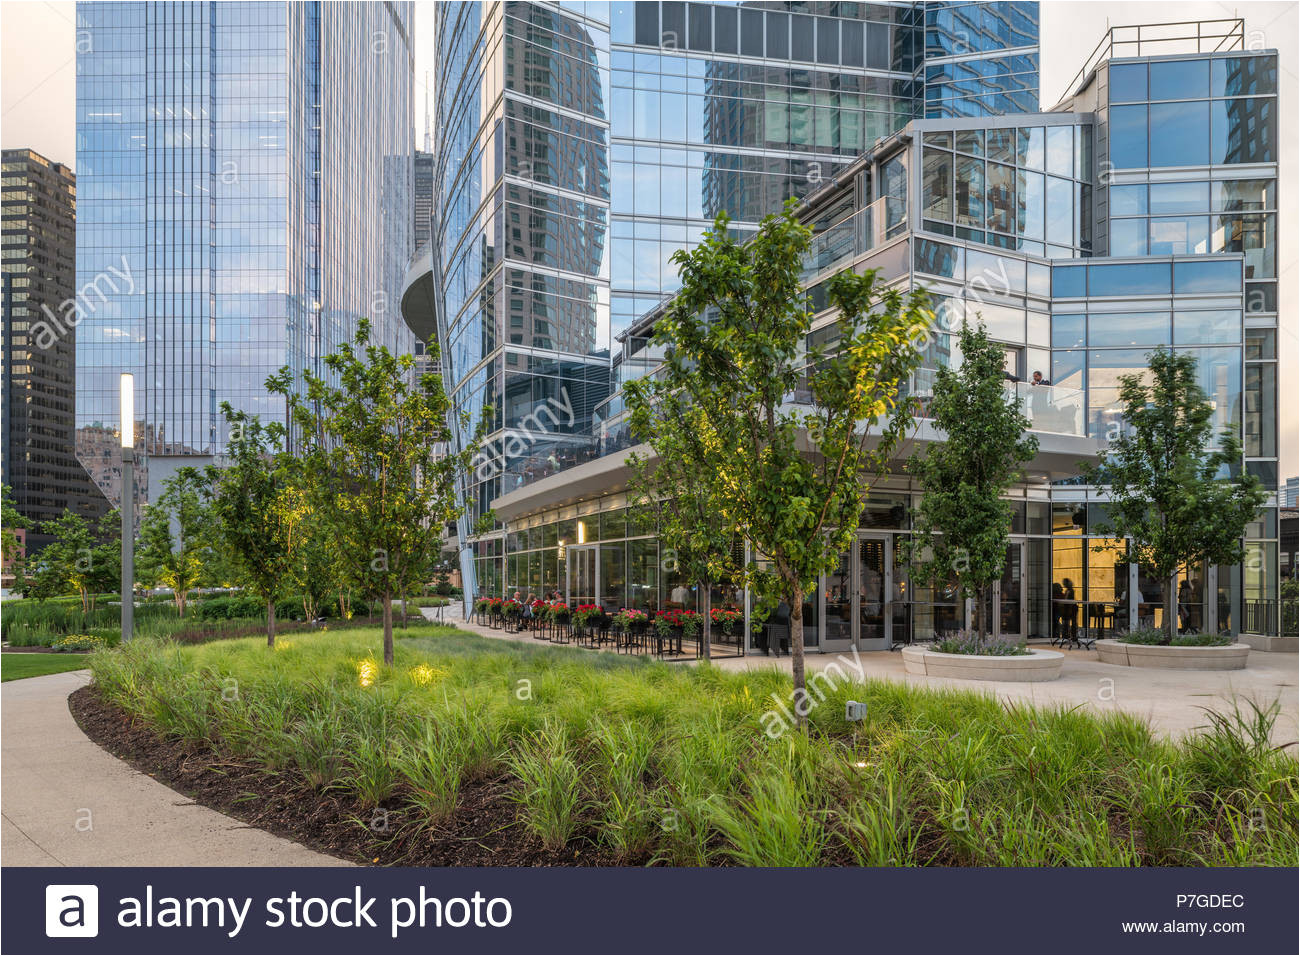 landscape architecture at river point tower stock image